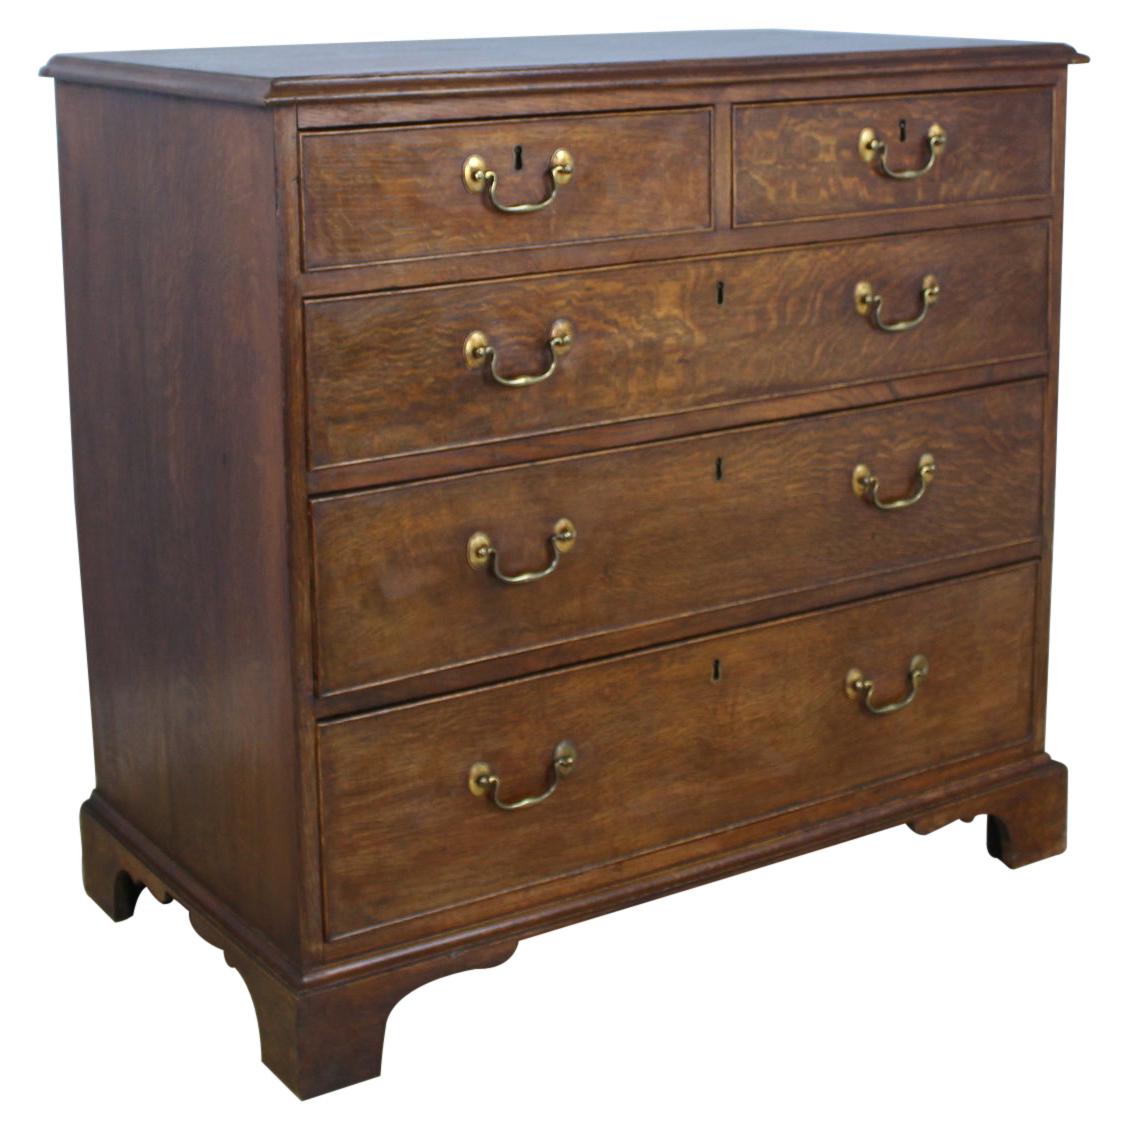 Early Welsh Oak Chest of Drawers